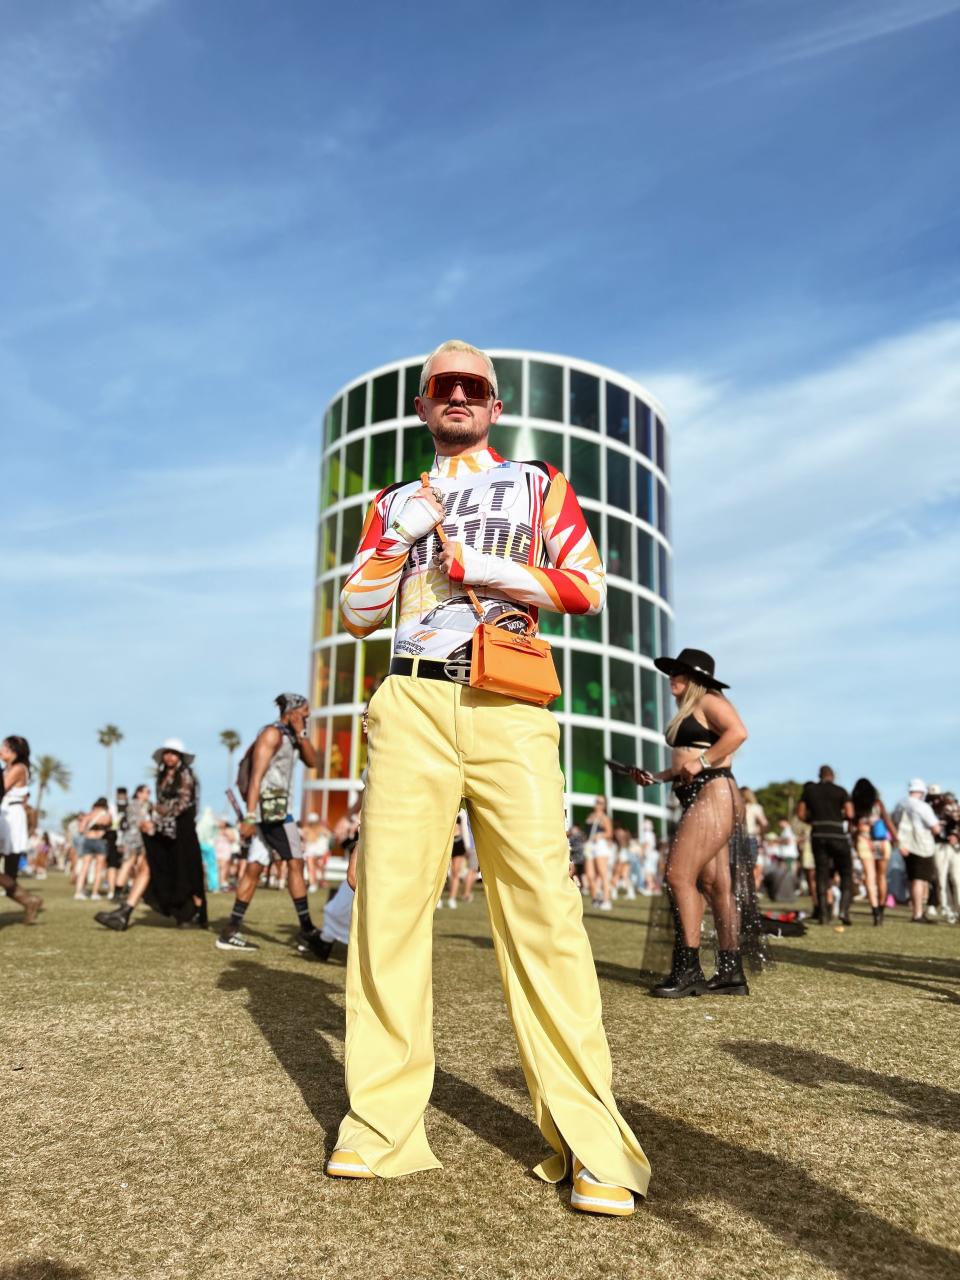 christian standing at coachella in yellow pants and racer shirt